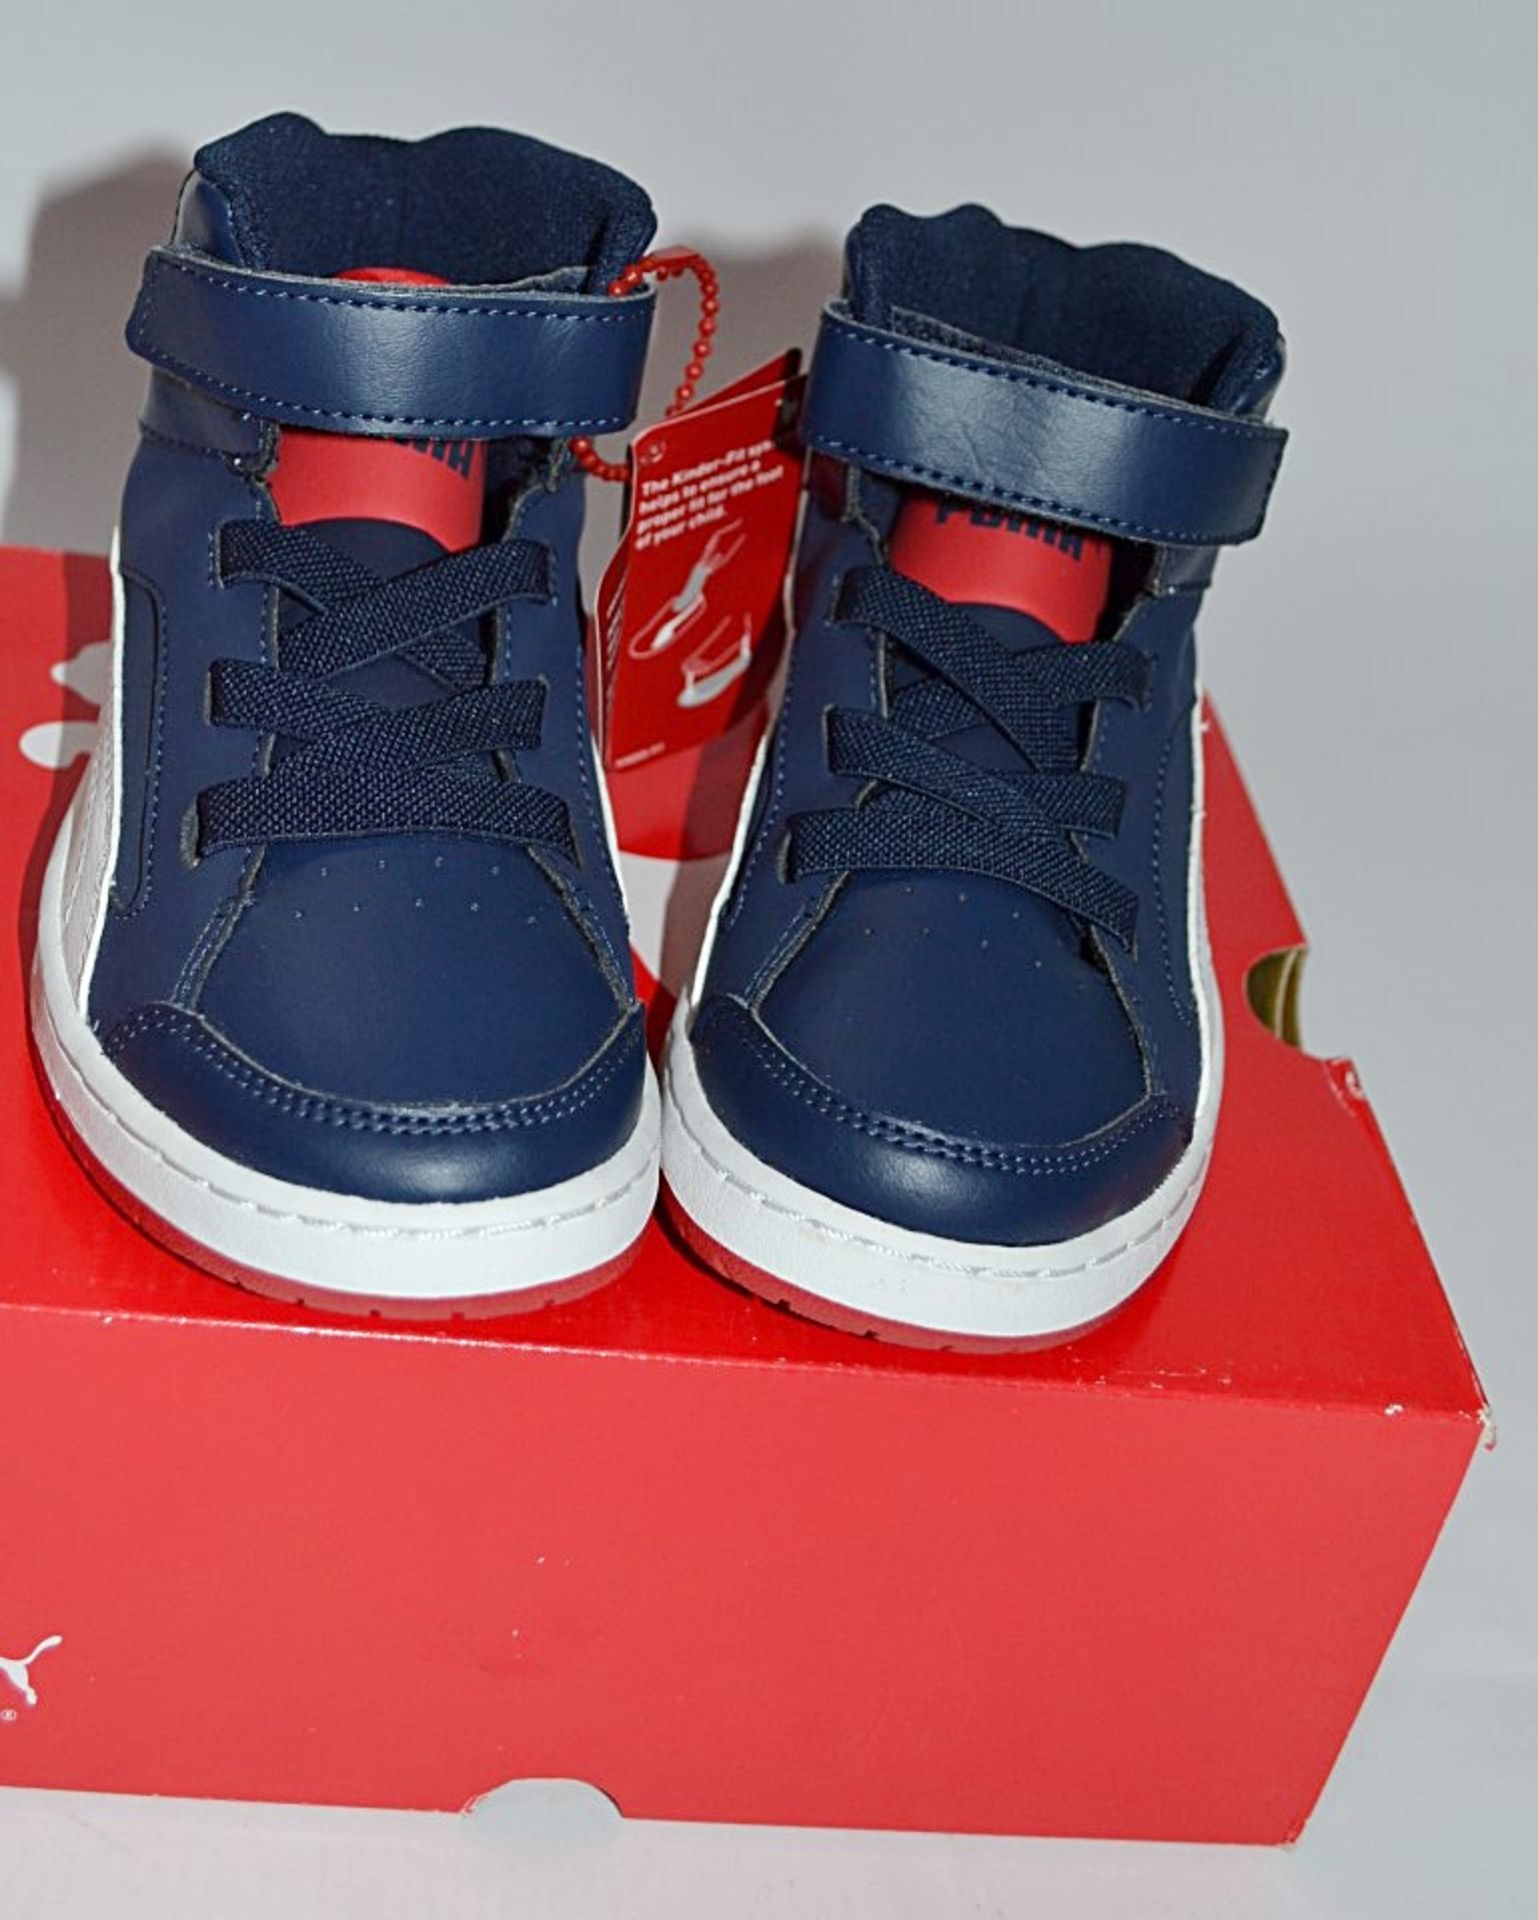 1 x Pair Of PUMA "Puma Rebound v2 Hi Kids" Trainers - Child Size: UK 12 - Colour: Red / Navy - CL155 - Image 3 of 4